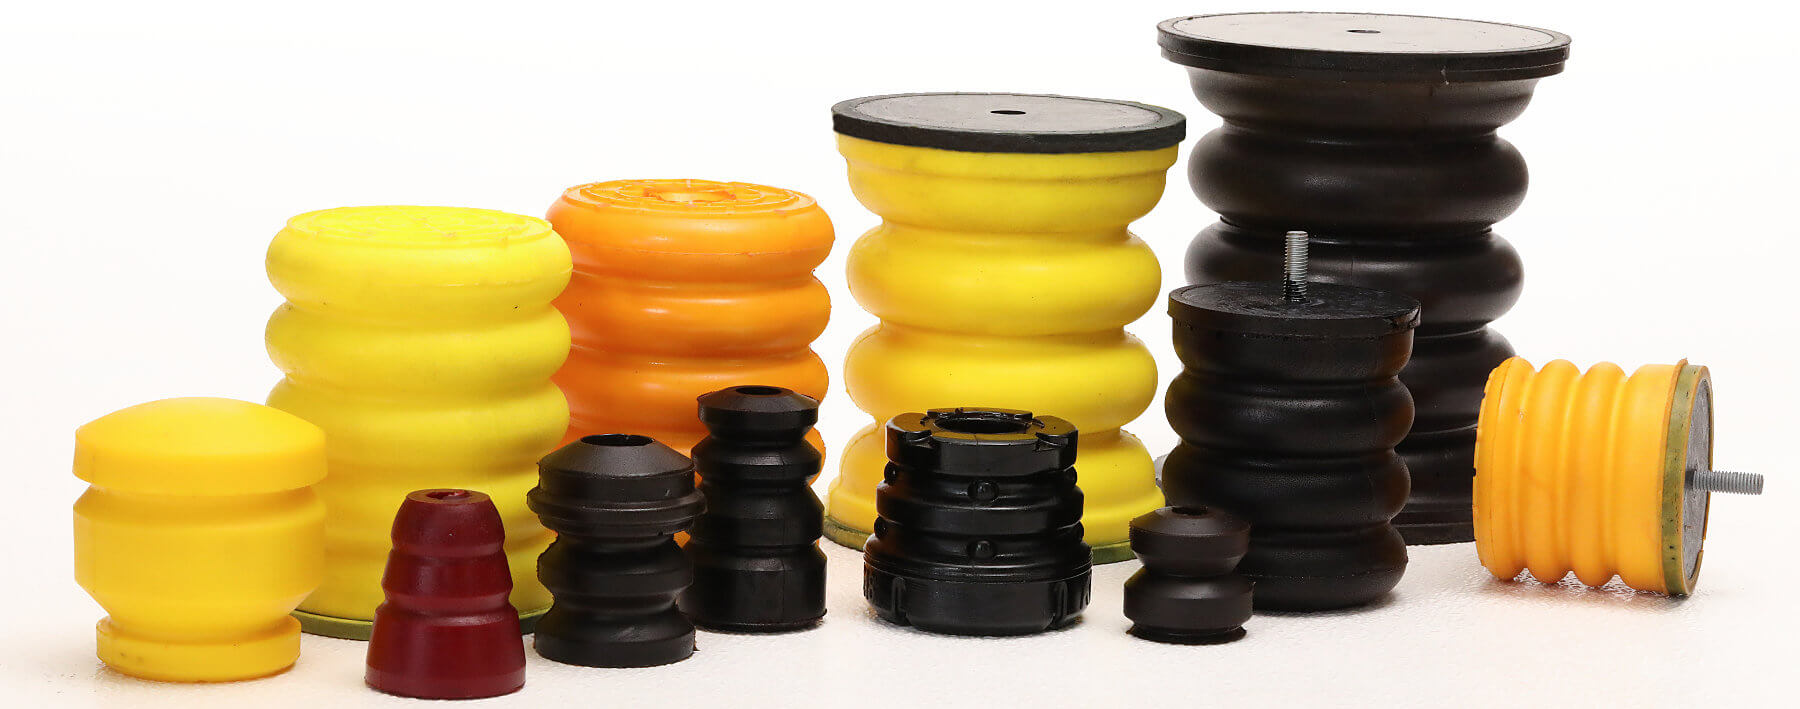 Various High-performance Polyurethane Foam Bumpers Lined Up